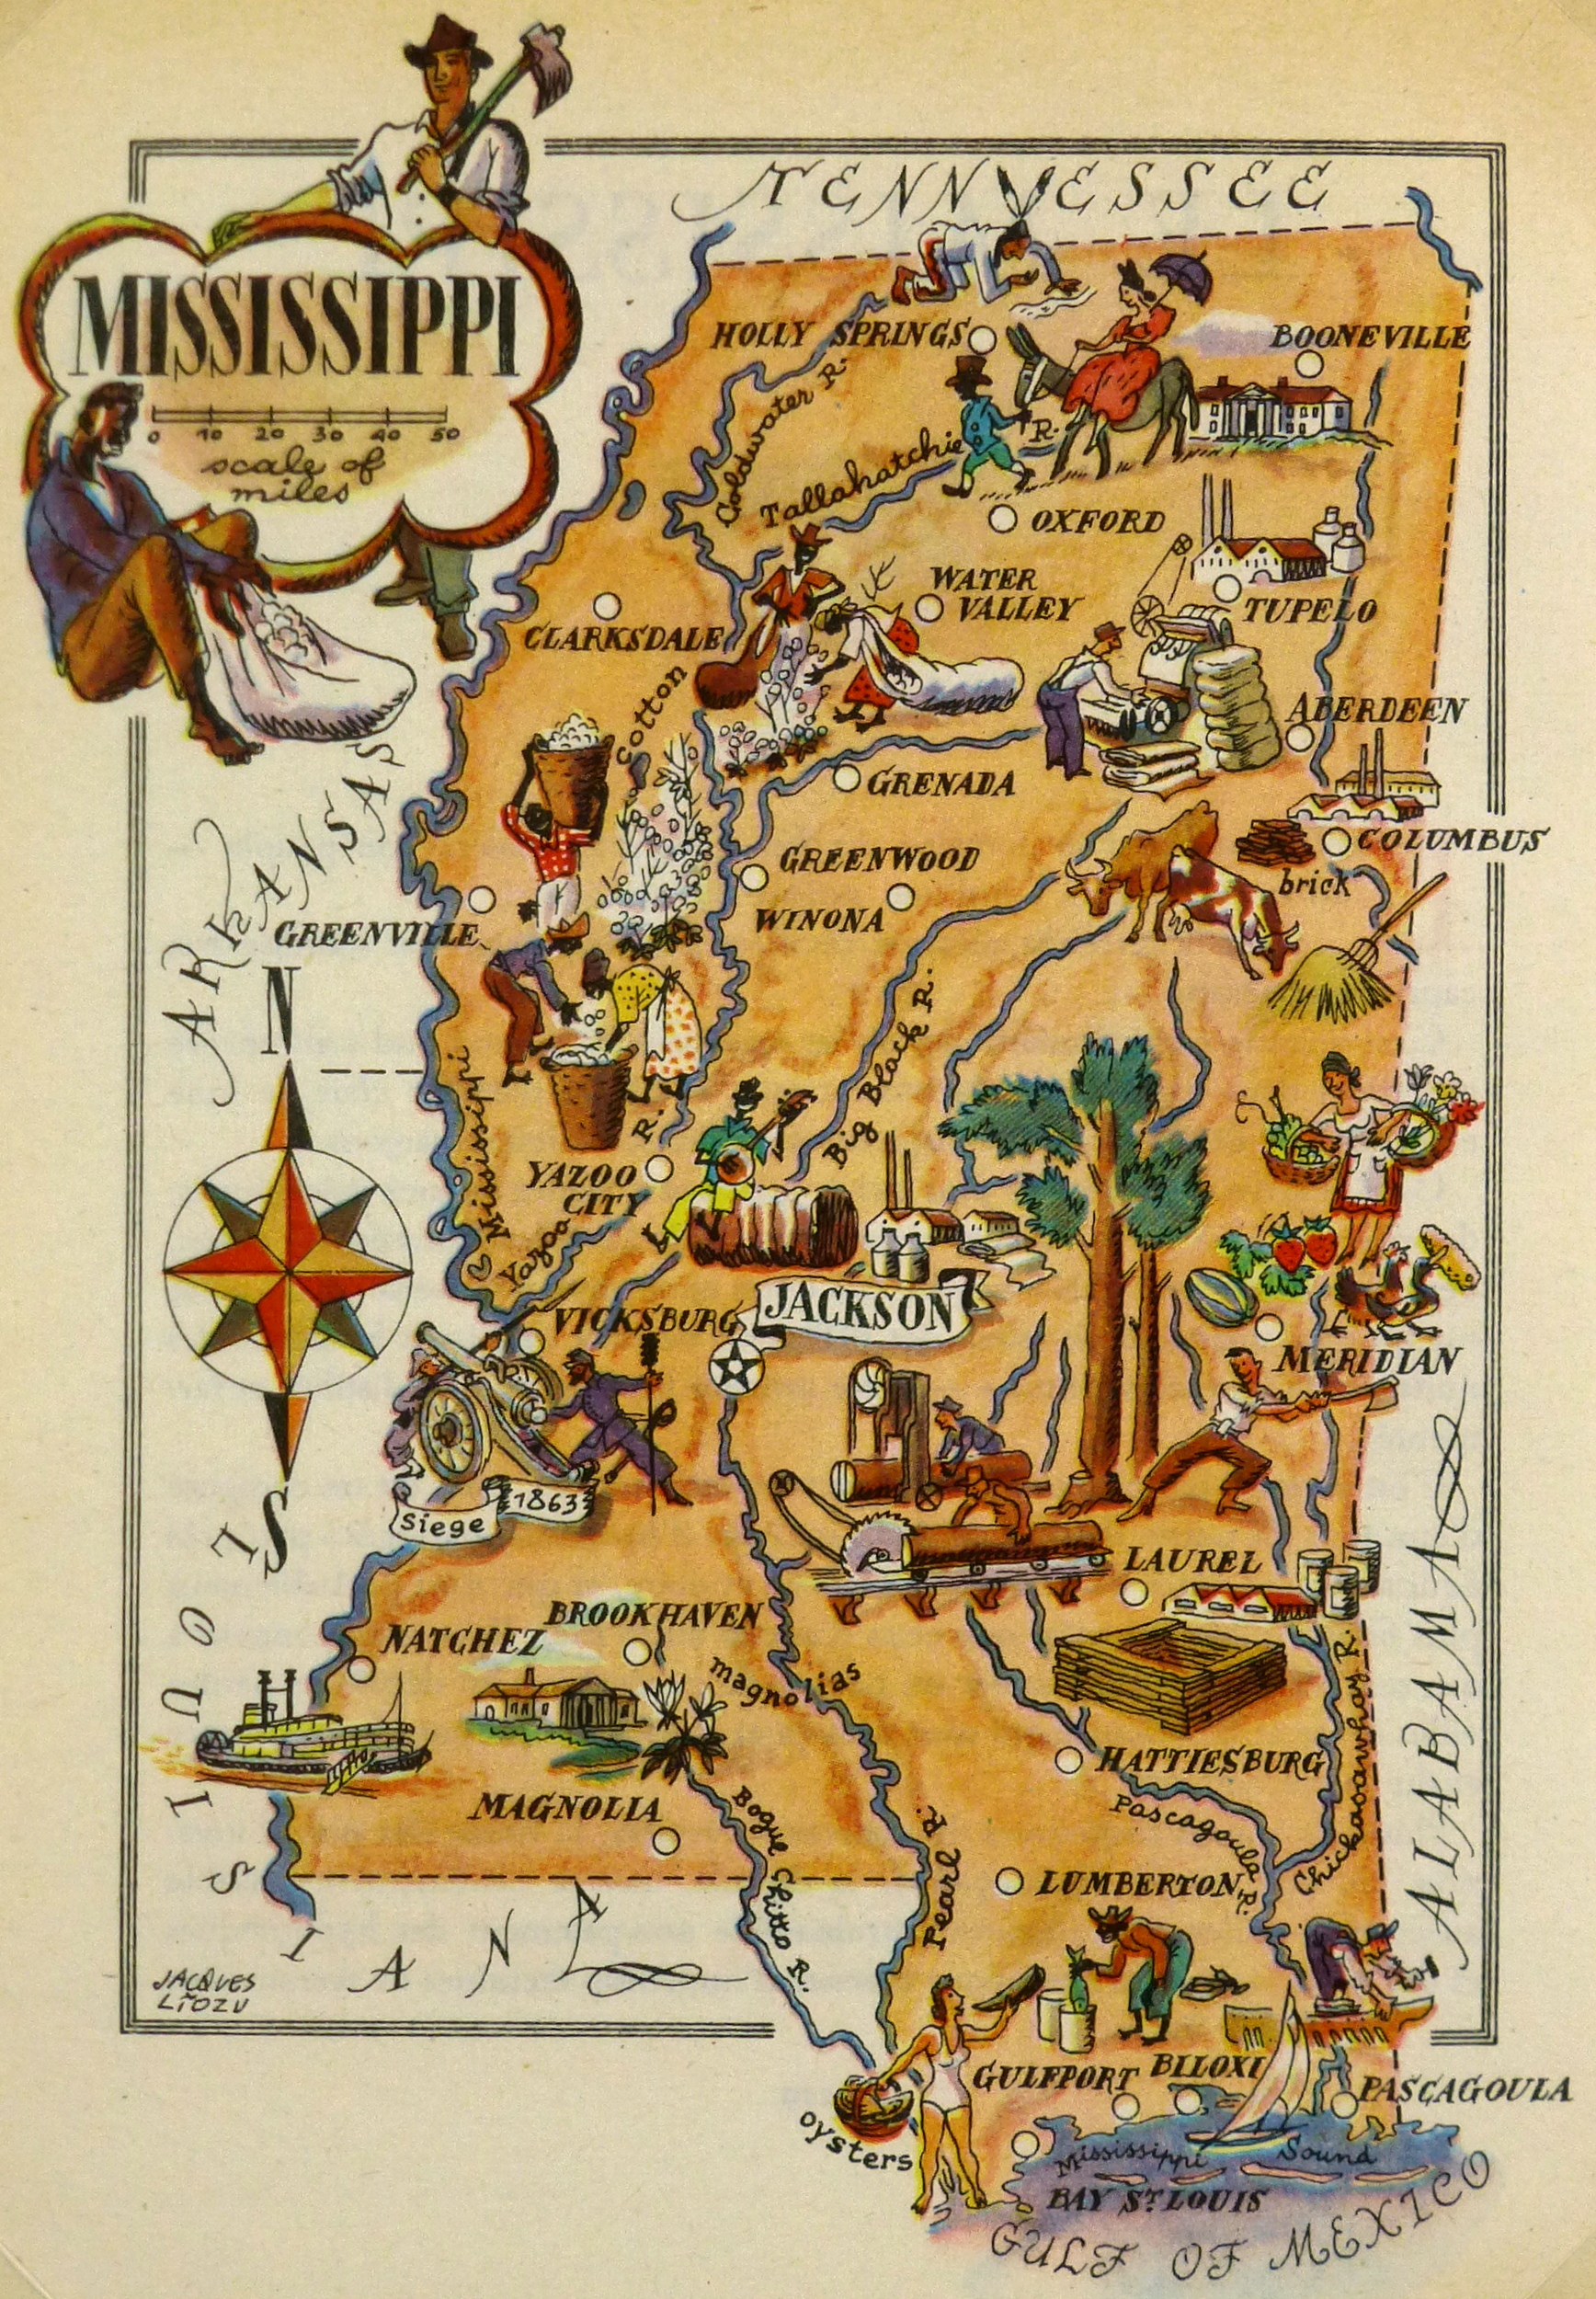 Mississippi Pictorial Map, 1946